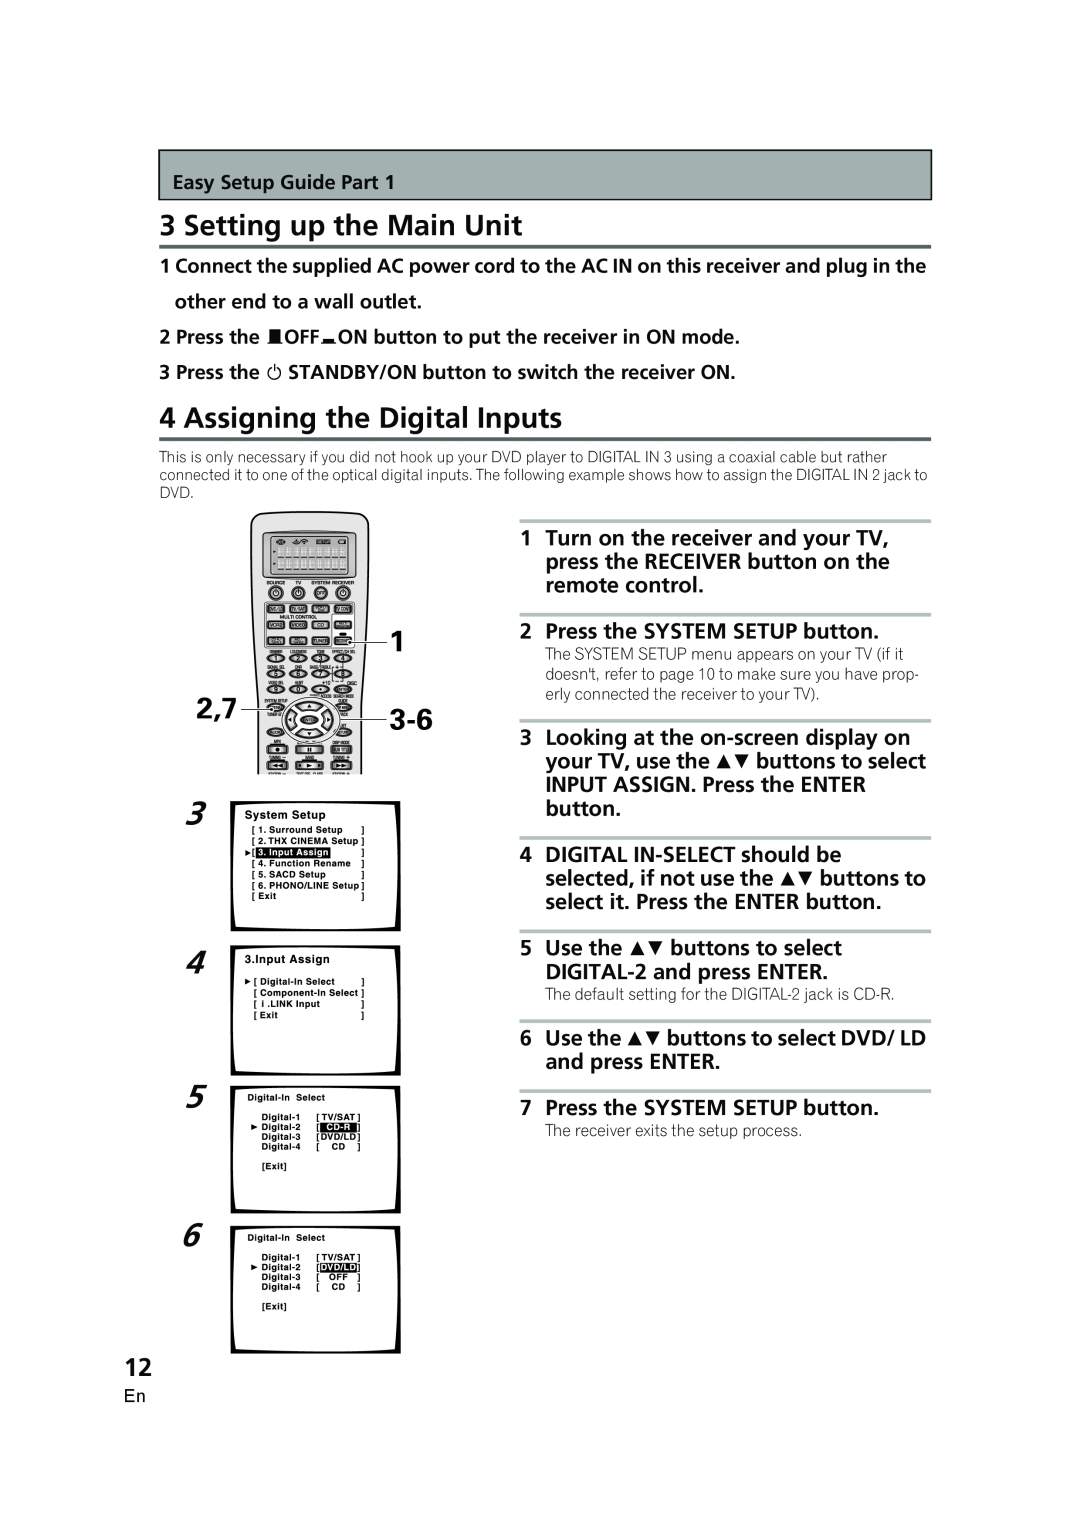 Pioneer VSX-AX5i-G manual Setting up the Main Unit, 4Assigning the Digital Inputs 